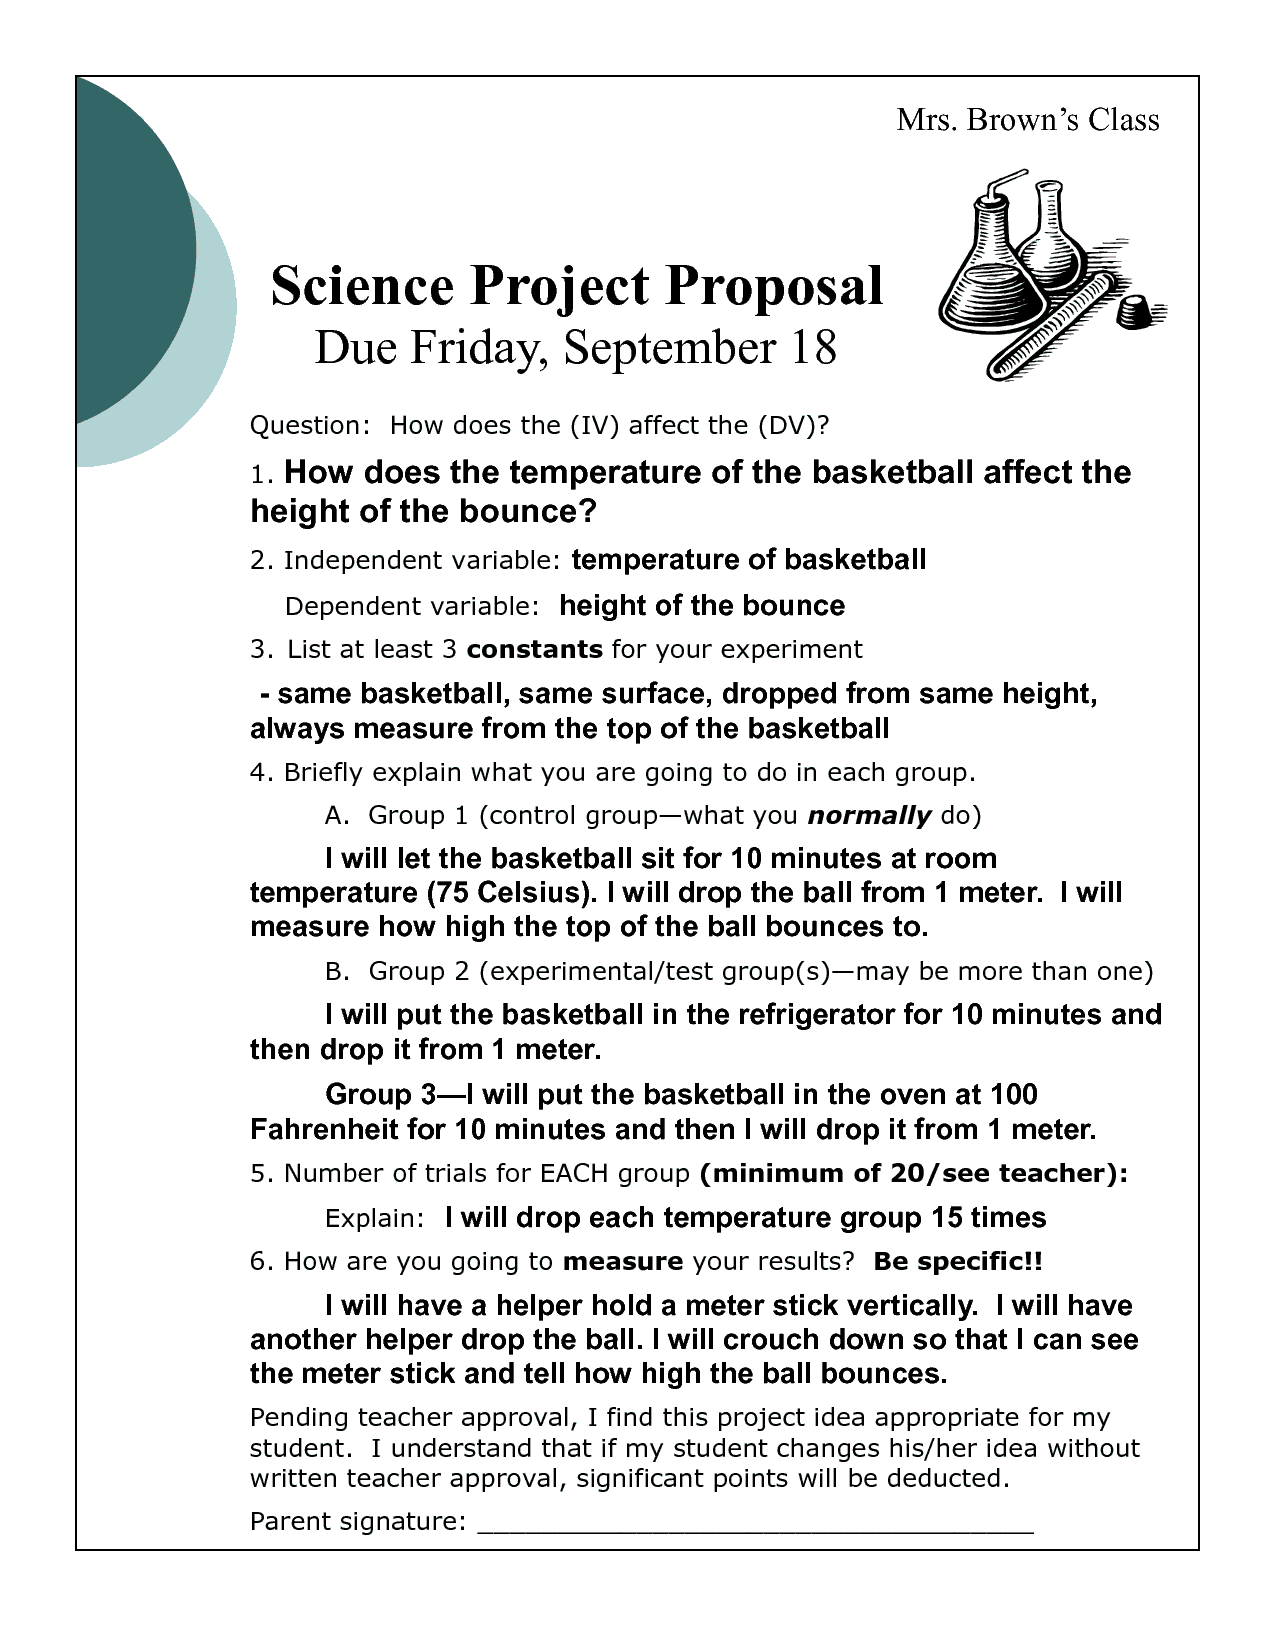 Project Proposal sample 1641